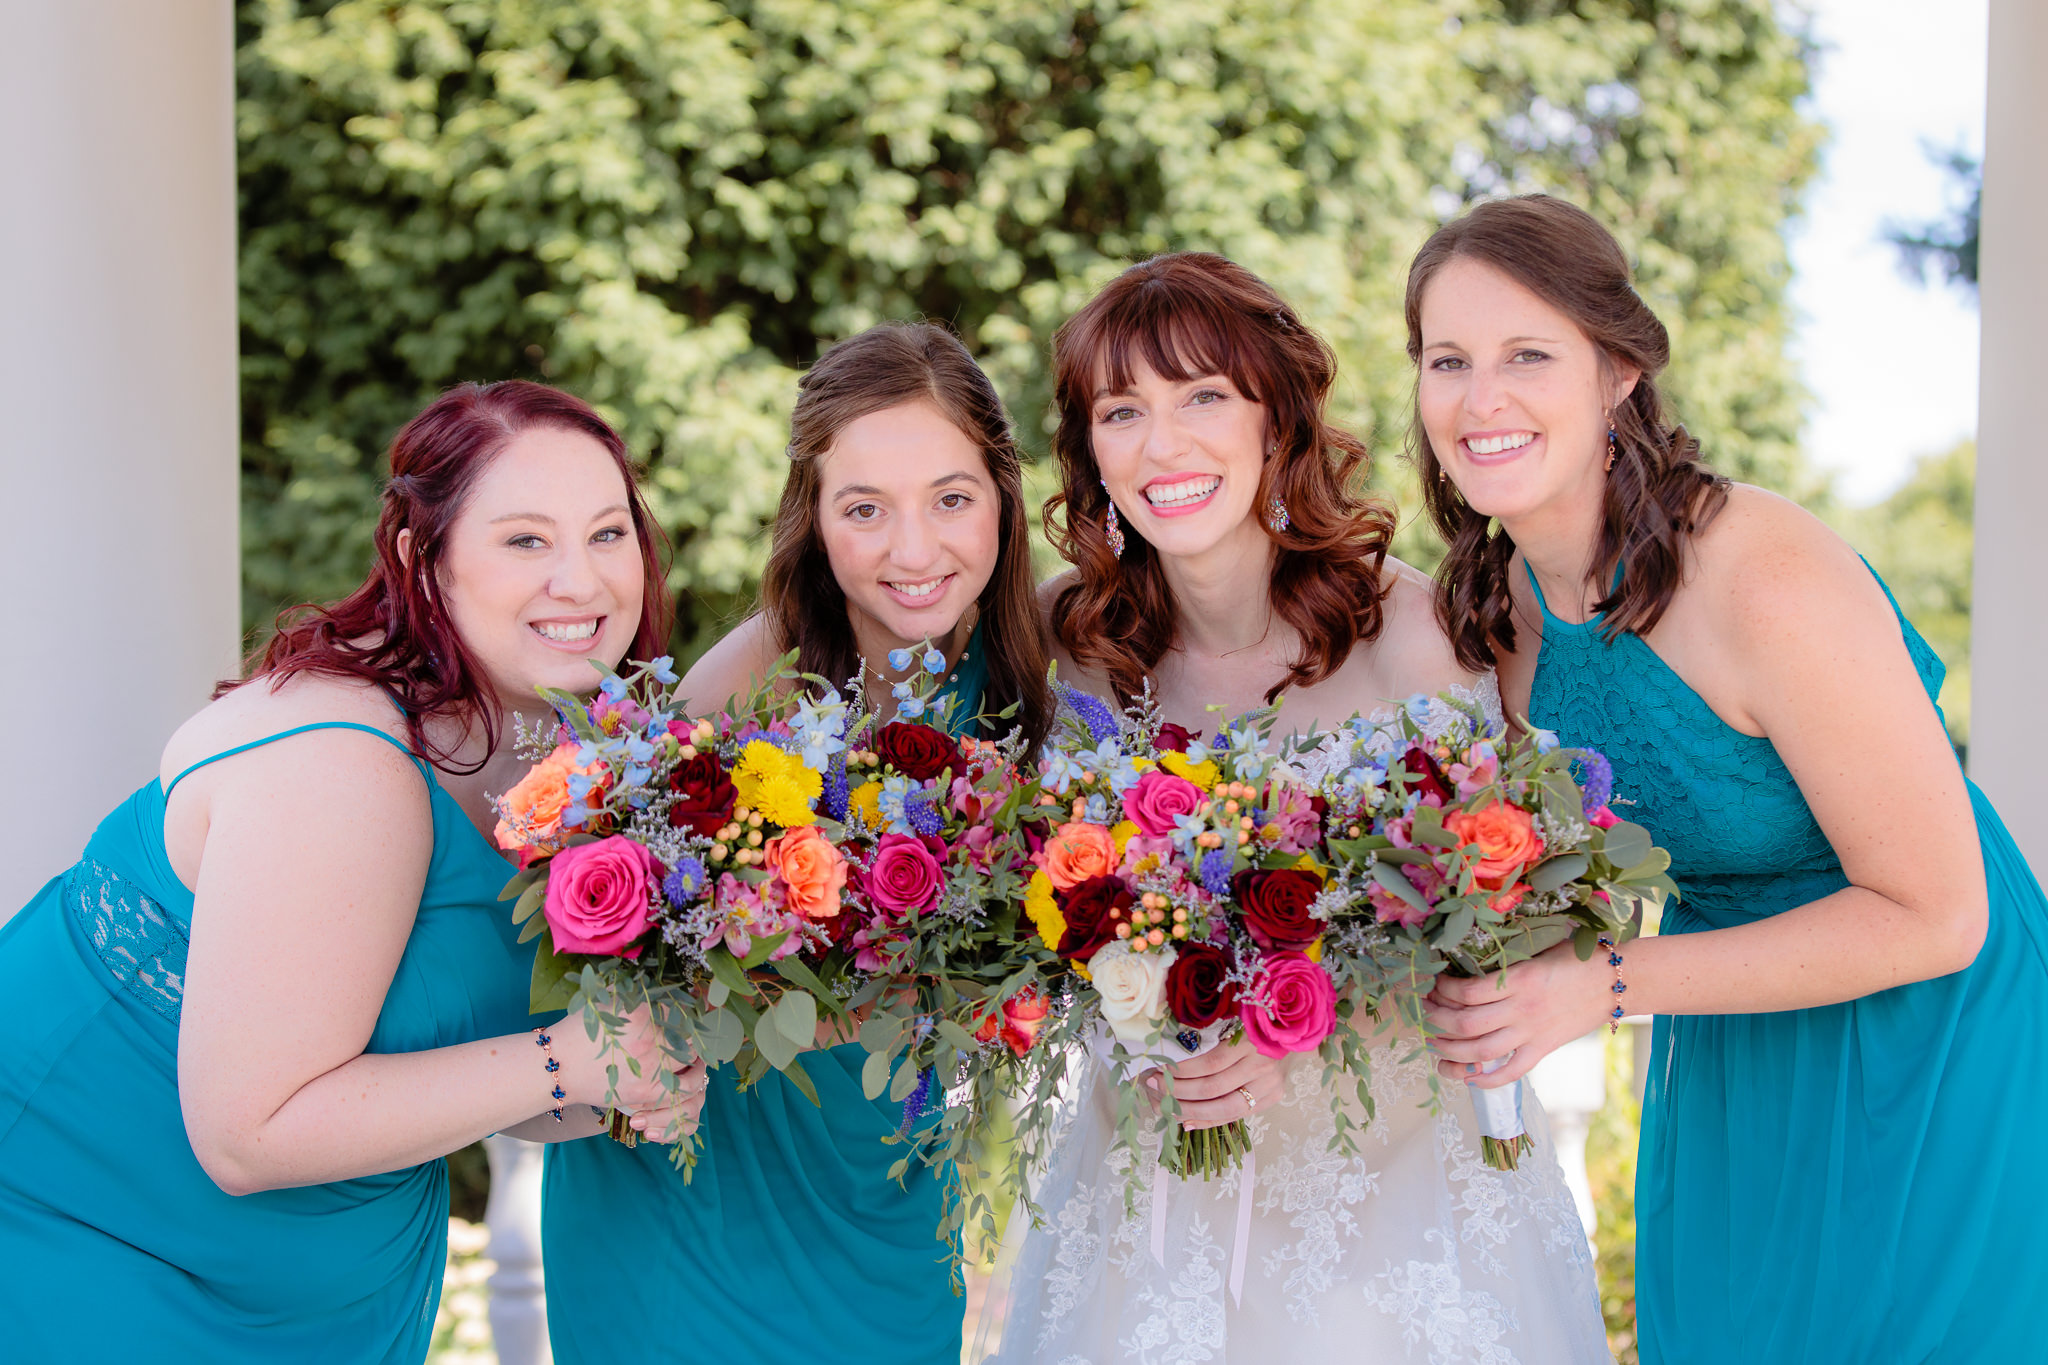 Bridesmaids hold colorful bouquets by Patti's Petals Flower Shop at Beaver Station